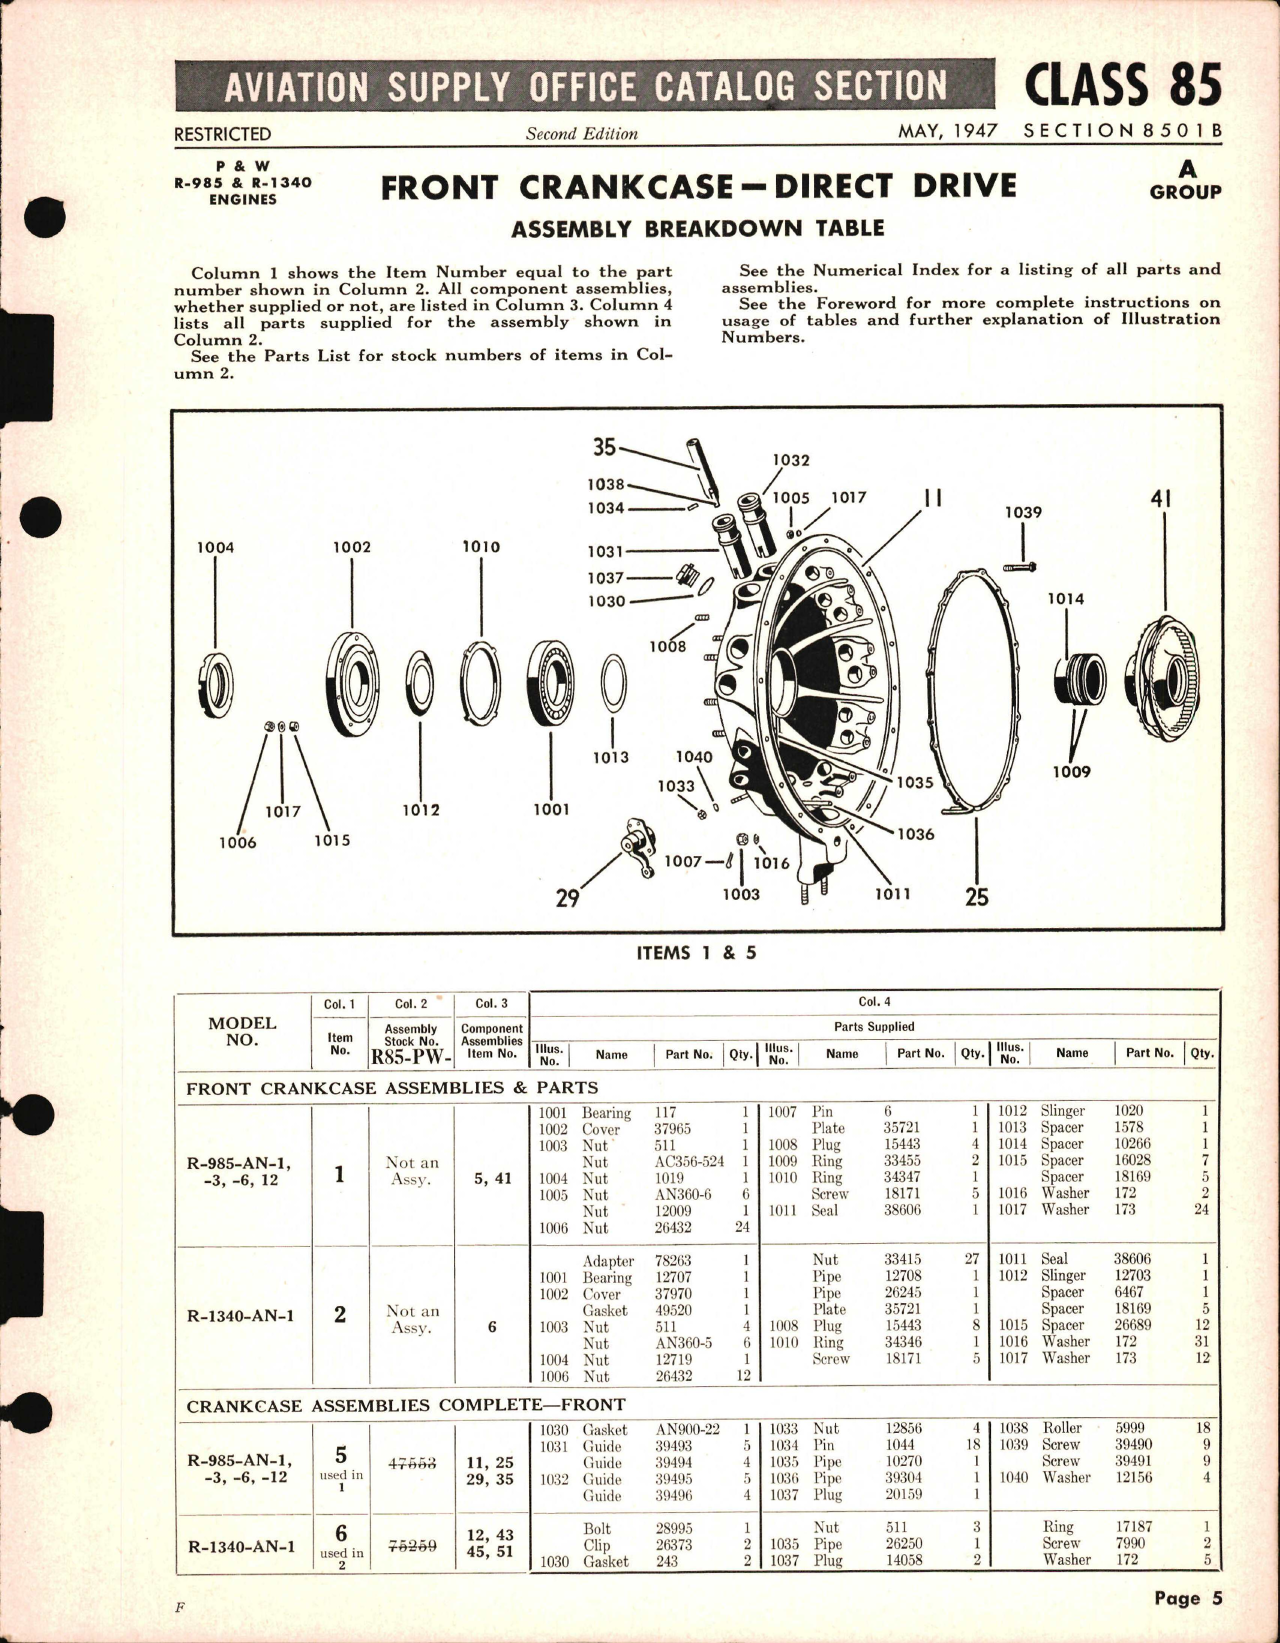 Sample page 5 from AirCorps Library document: Pratt & Whitney Spare Parts for Pratt & Whitney Engines R985-AN-1, -3, -6, -12, R-1340-AN-1, and -2